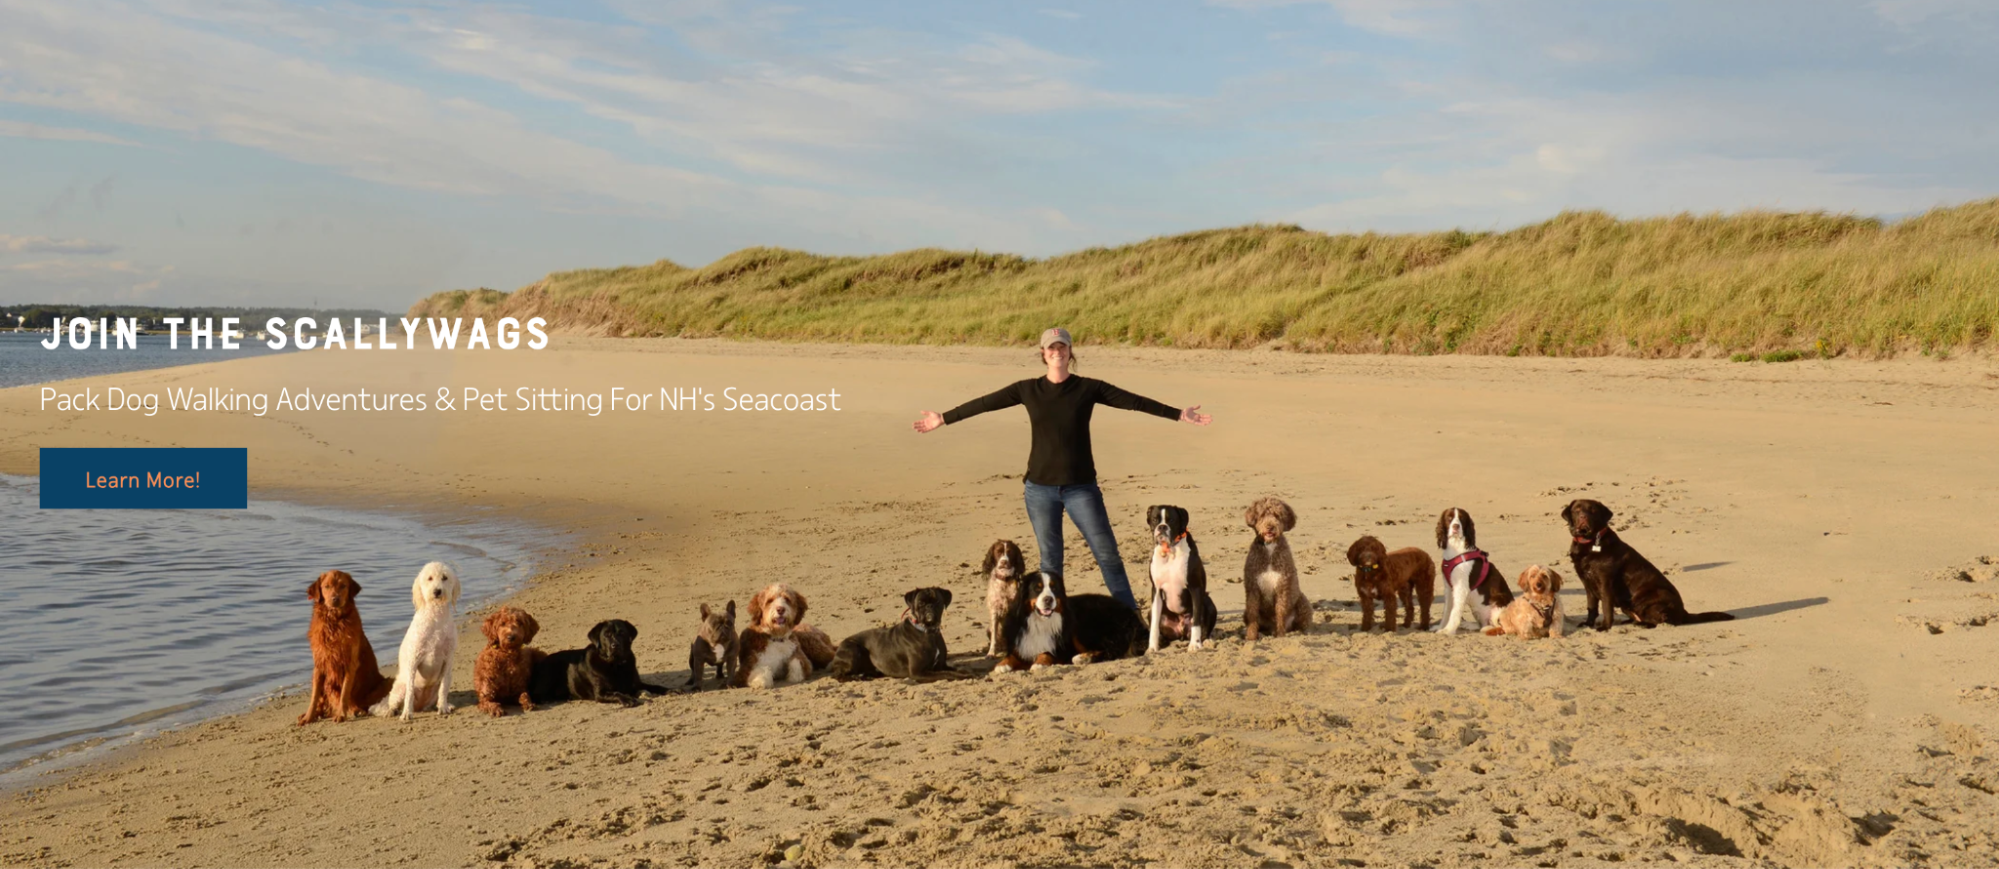 Dogs line up for a photo on a windswept beach. The image promotes a coastal dog-walking business.